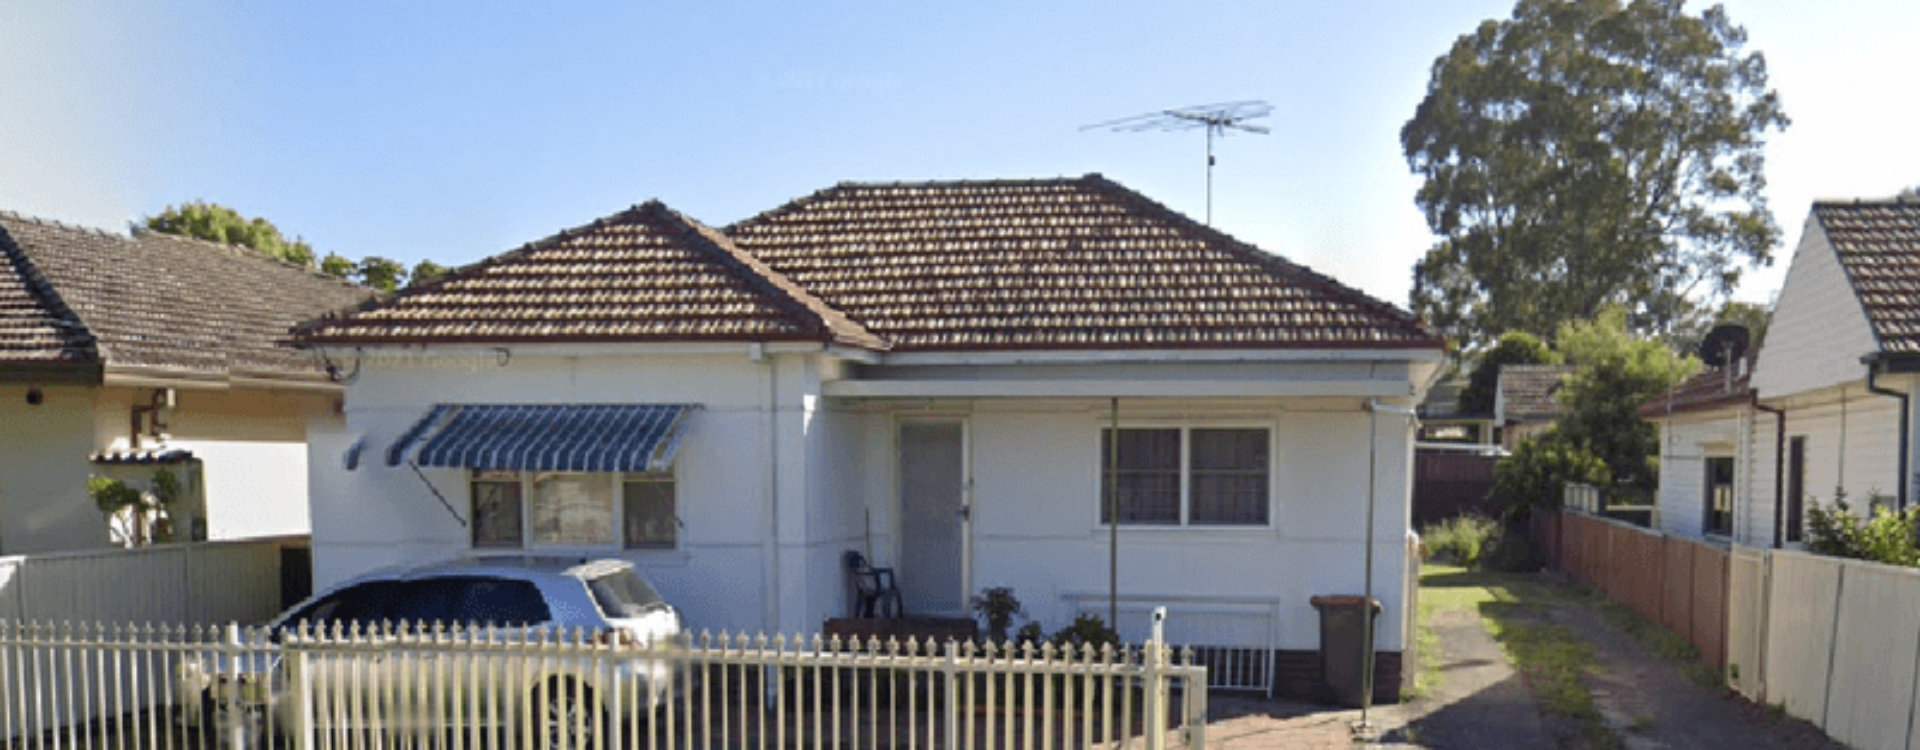 102 The Avenue, Canley Vale NSW 2166